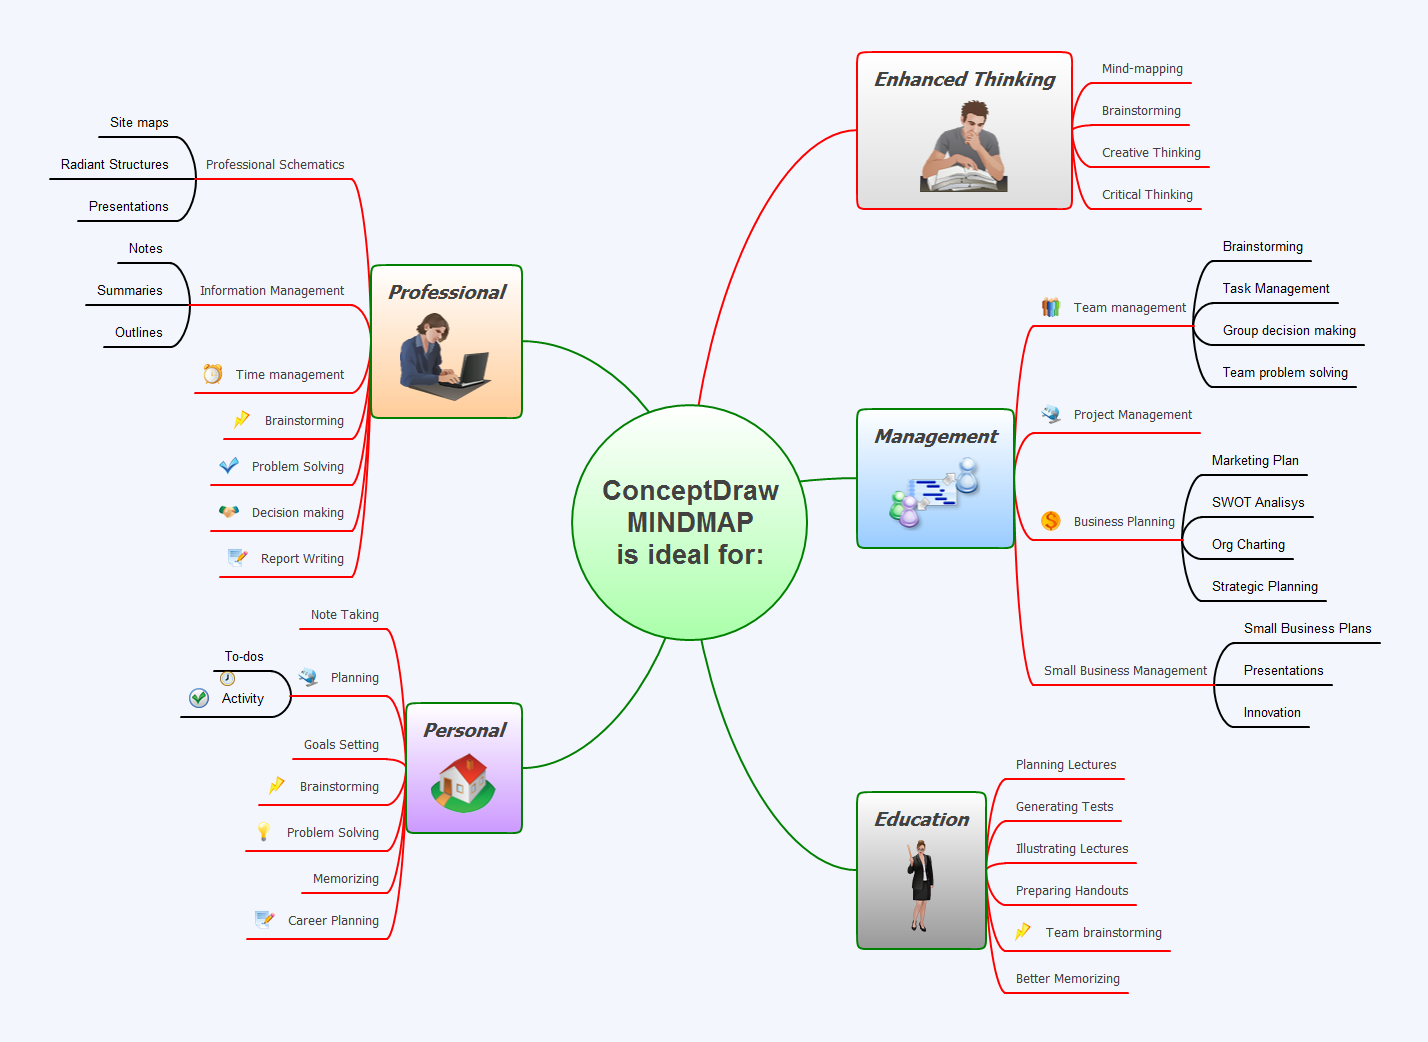 Concept Draw Office 10.0.0.0 + MINDMAP 15.0.0.275 for ipod download